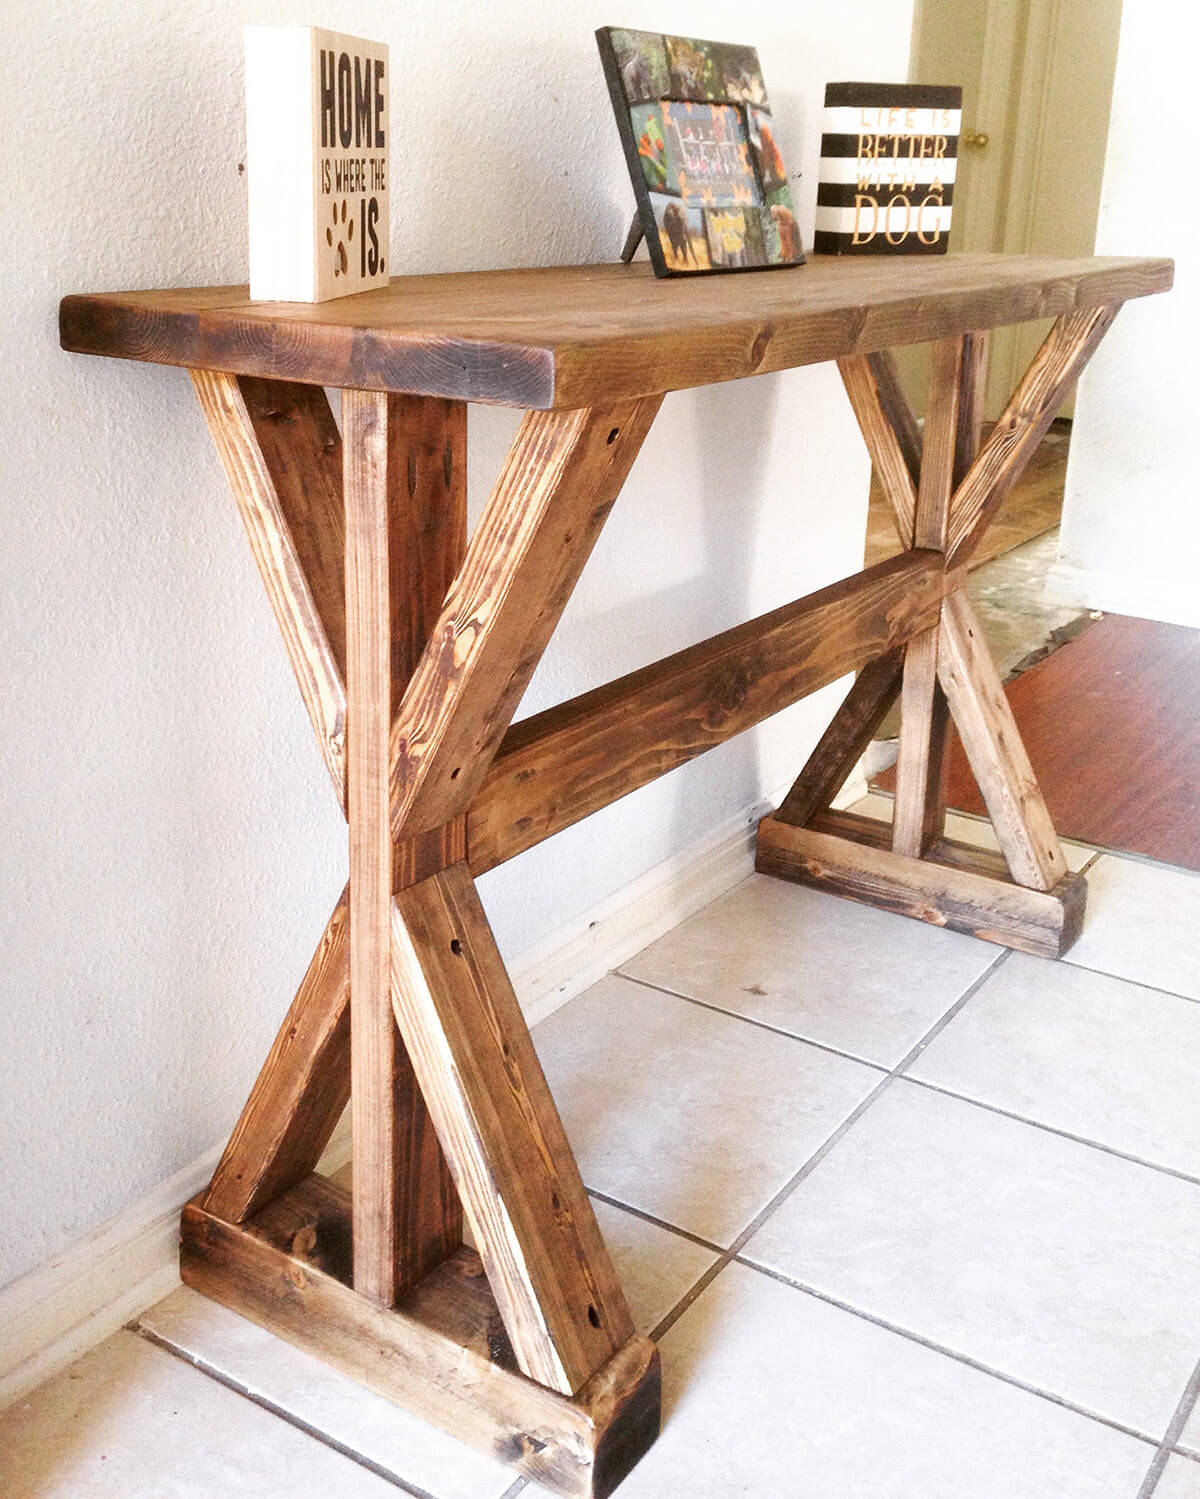 Woodworking entry table